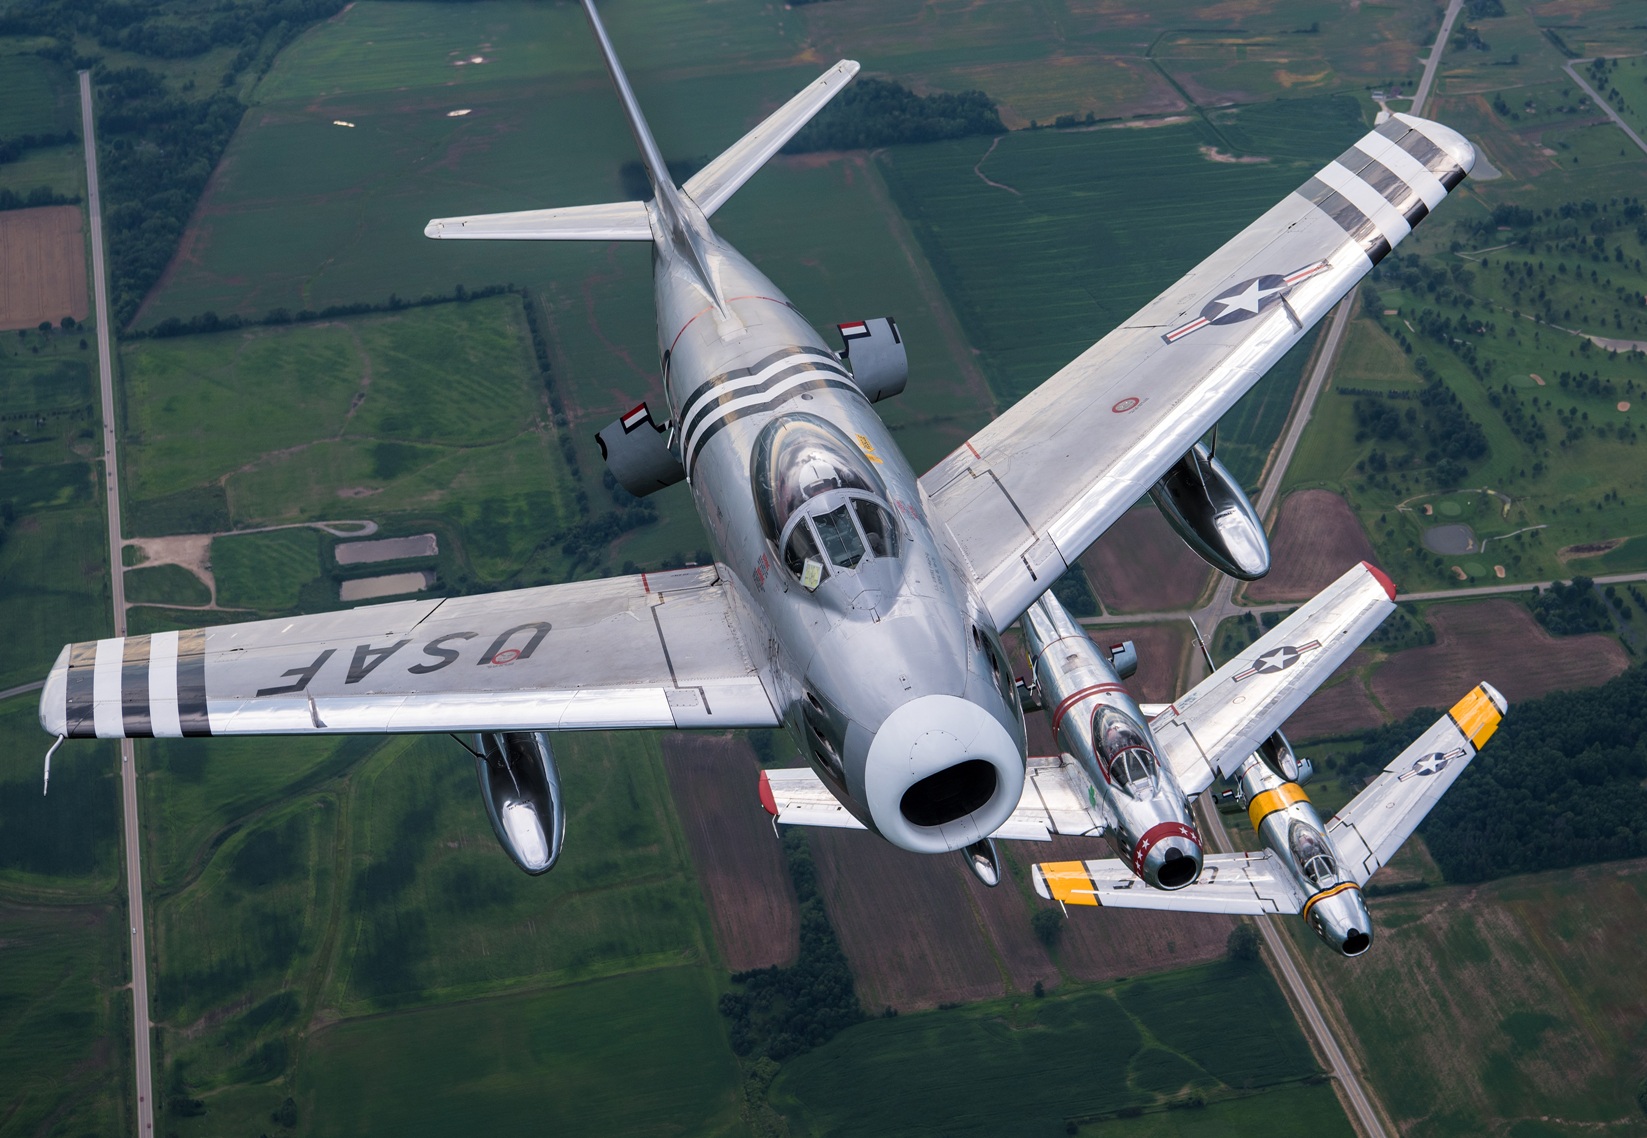 Vintage F-86 Sabre fighter jets will be among those flying during EAA AirVenture Oshkosh 2018 in Oshkosh, Wisconsin, on July 23-29. (Photo by Scott Slocum)